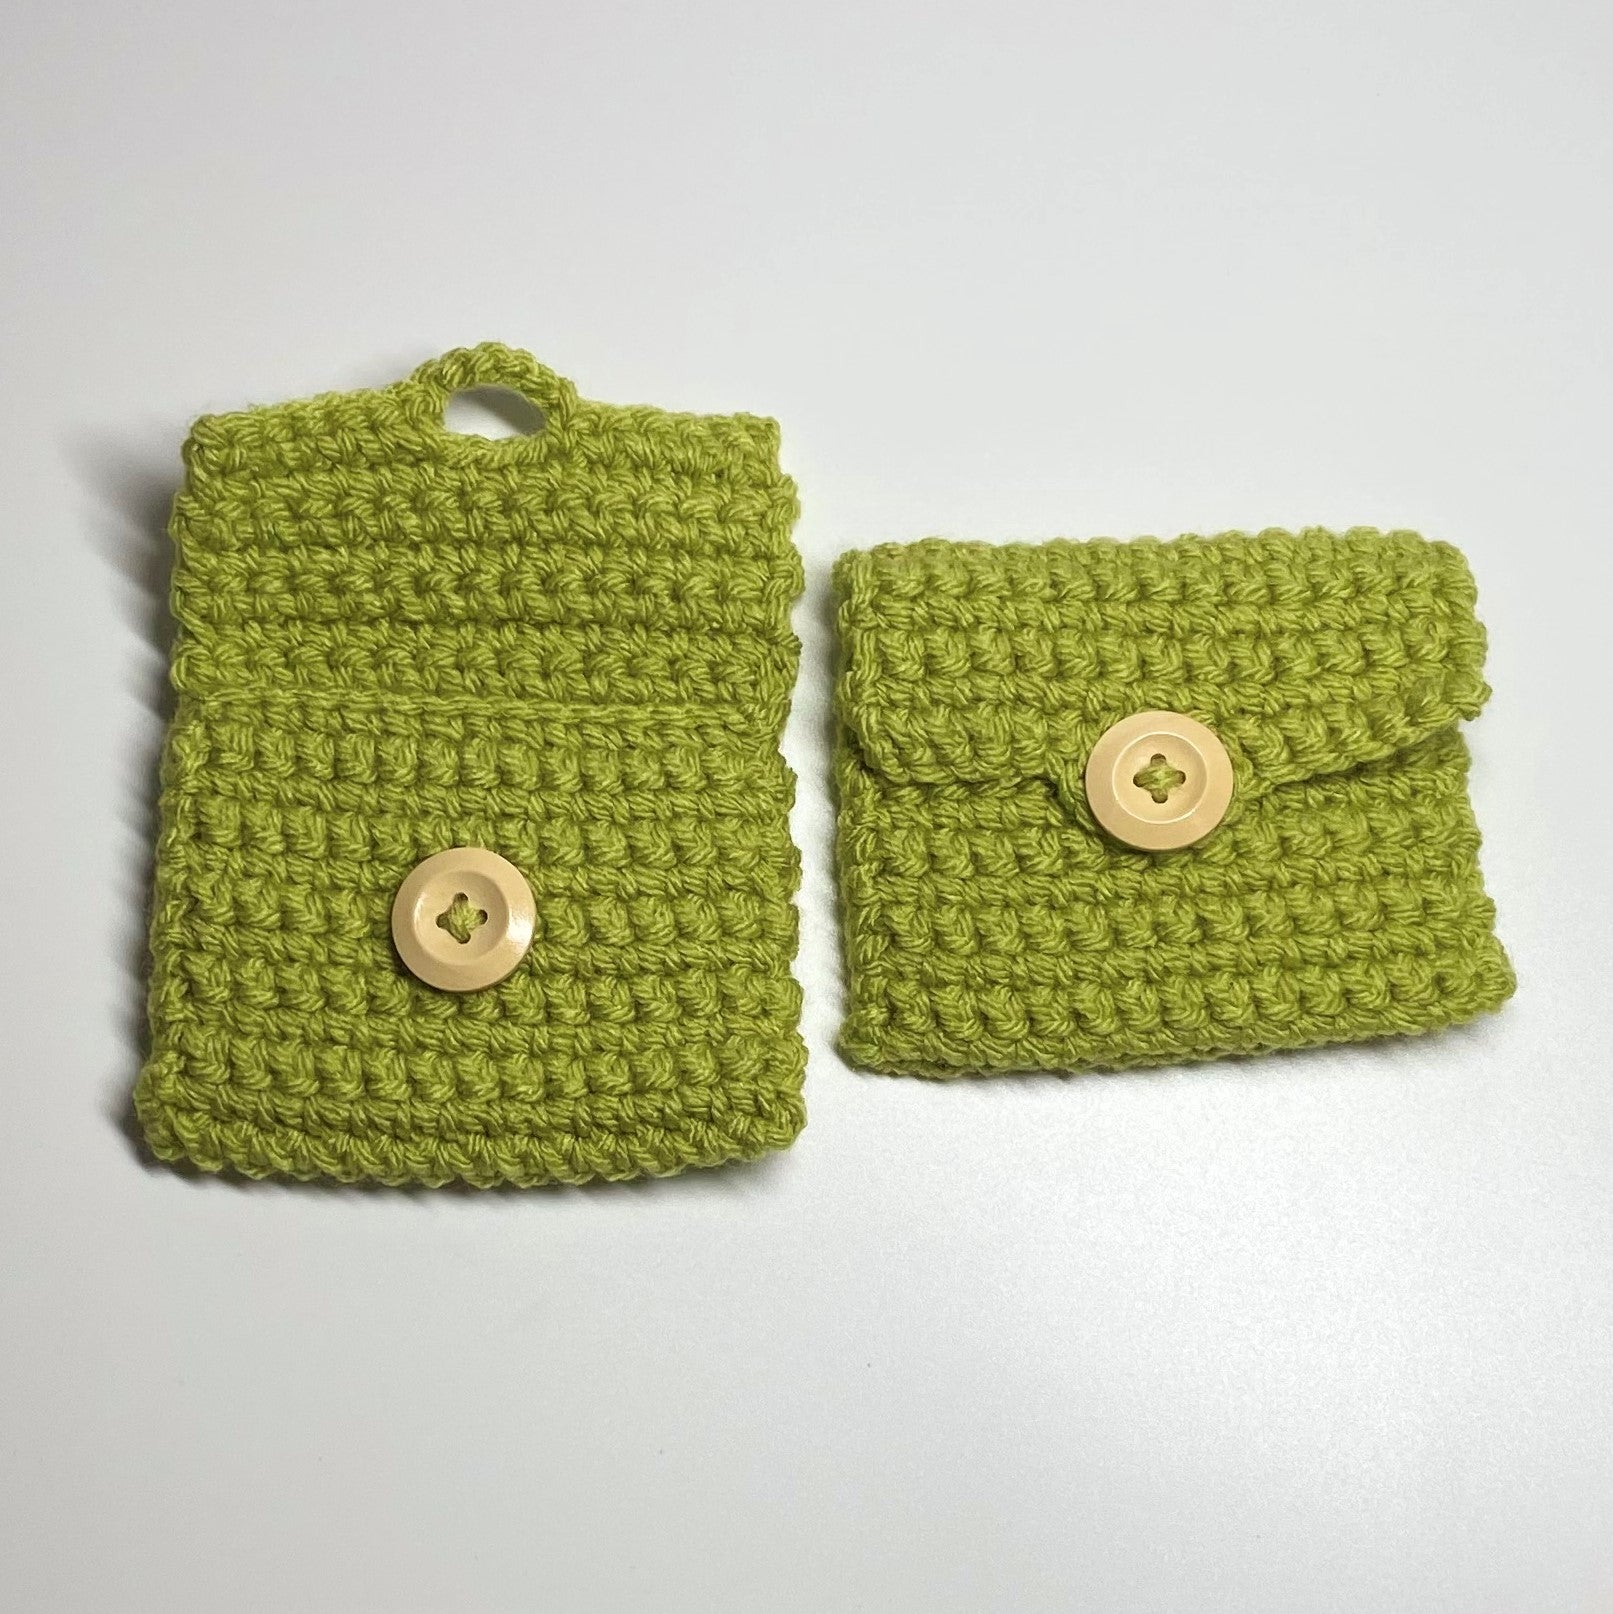 Just be happy!: Coin Purse {Free Pattern}